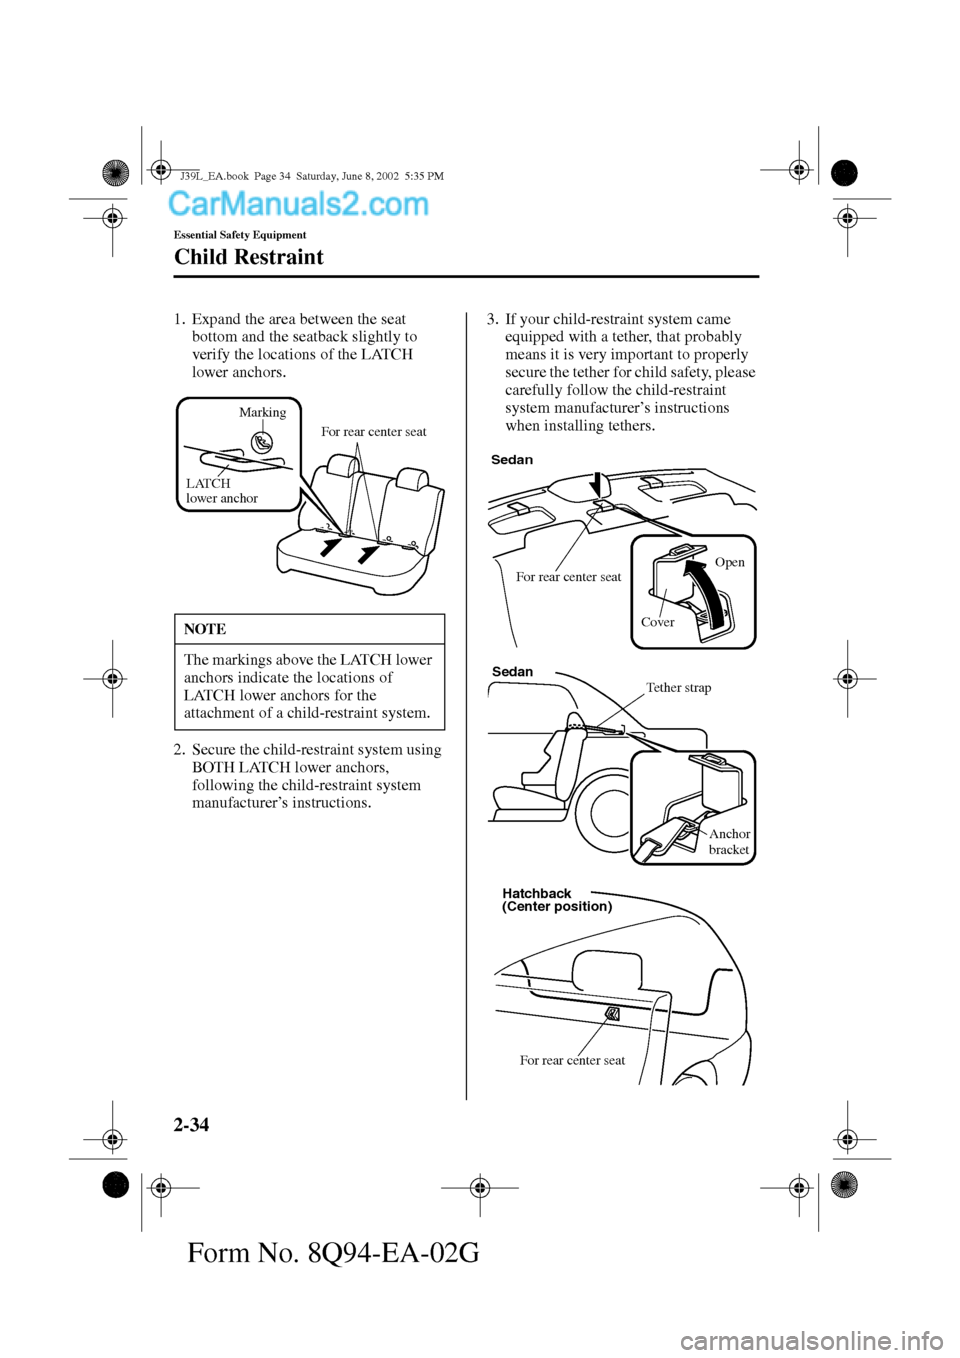 MAZDA MODEL PROTÉGÉ 2003   (in English) Service Manual 2-34
Essential Safety Equipment
Child Restraint
Form No. 8Q94-EA-02G
1. Expand the area between the seat 
bottom and the seatback slightly to 
verify the locations of the LATCH 
lower anchors.
2. Secu